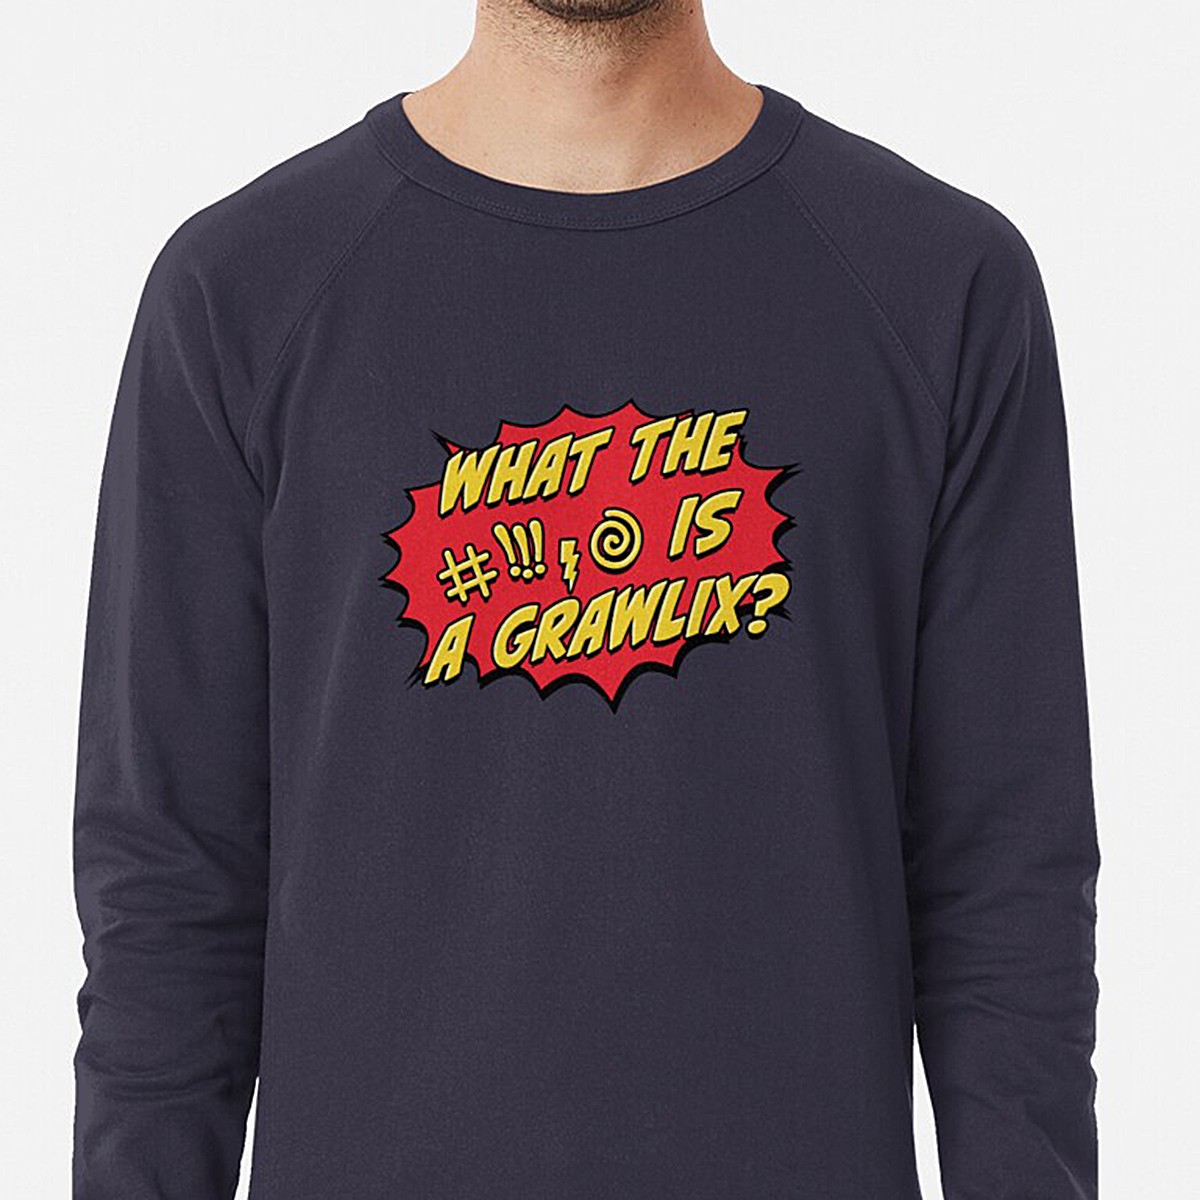 What the #%@$ is a Grawlix Lightweight Sweatshirt by NTK Apparel